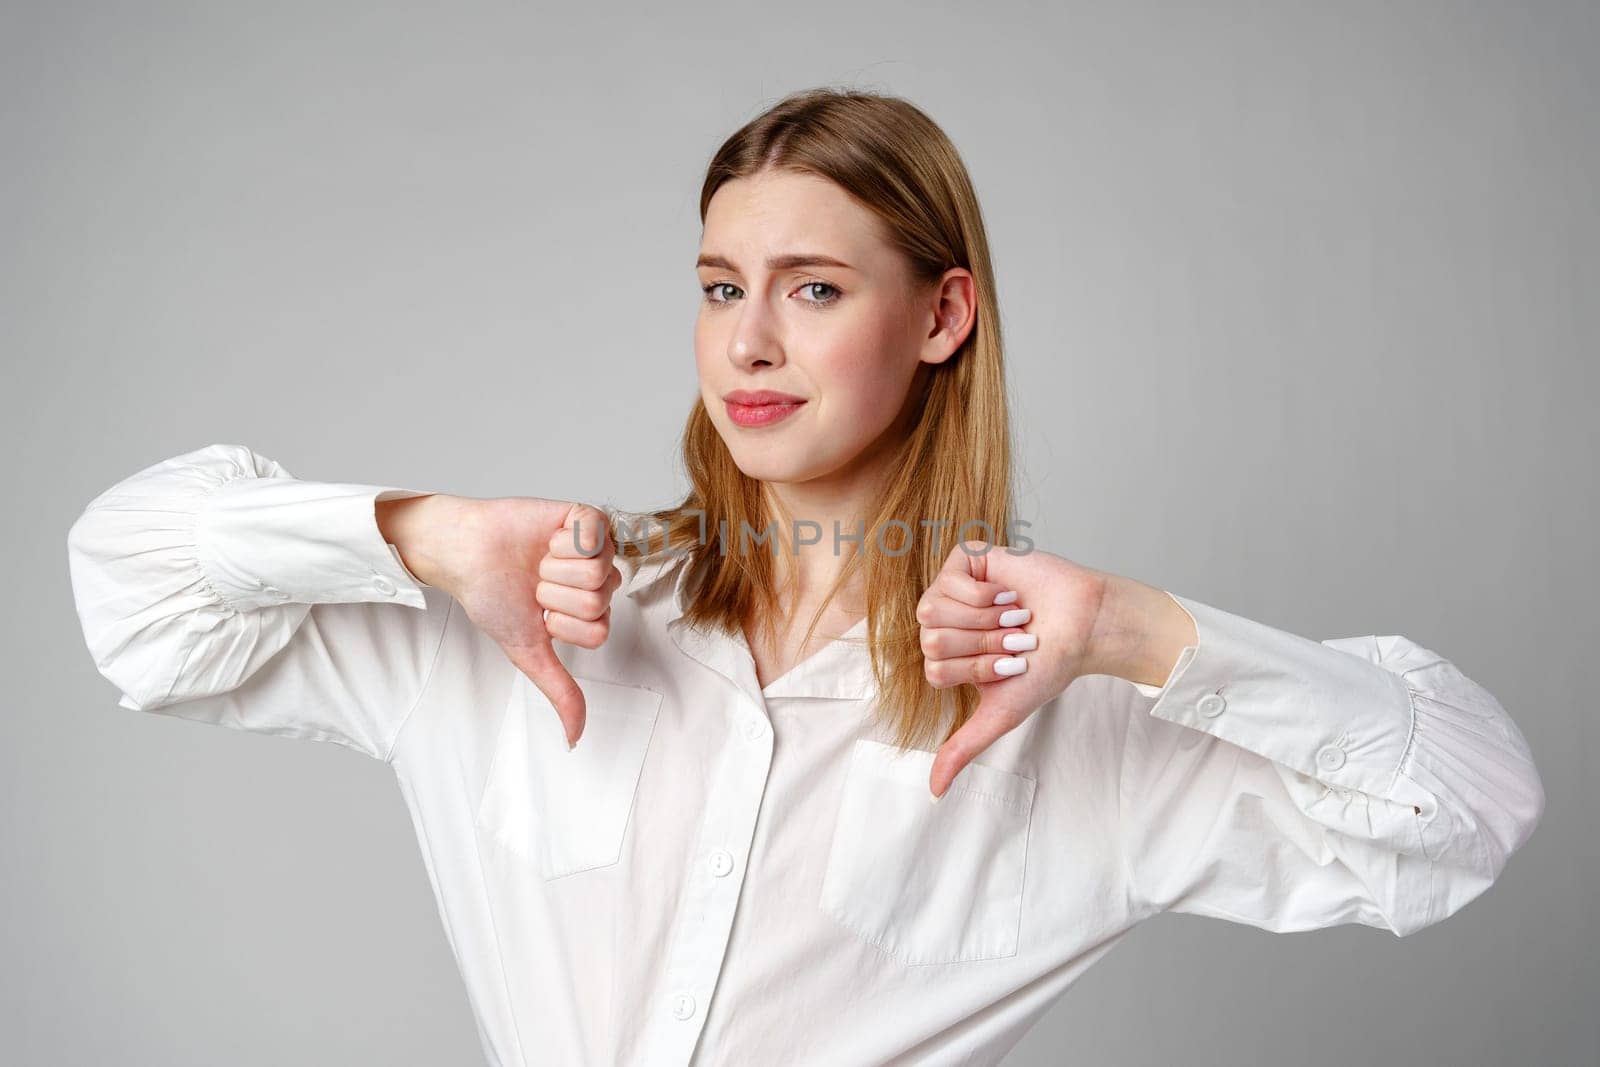 Young Woman in White Shirt Pointing Finger Down Dislike by Fabrikasimf